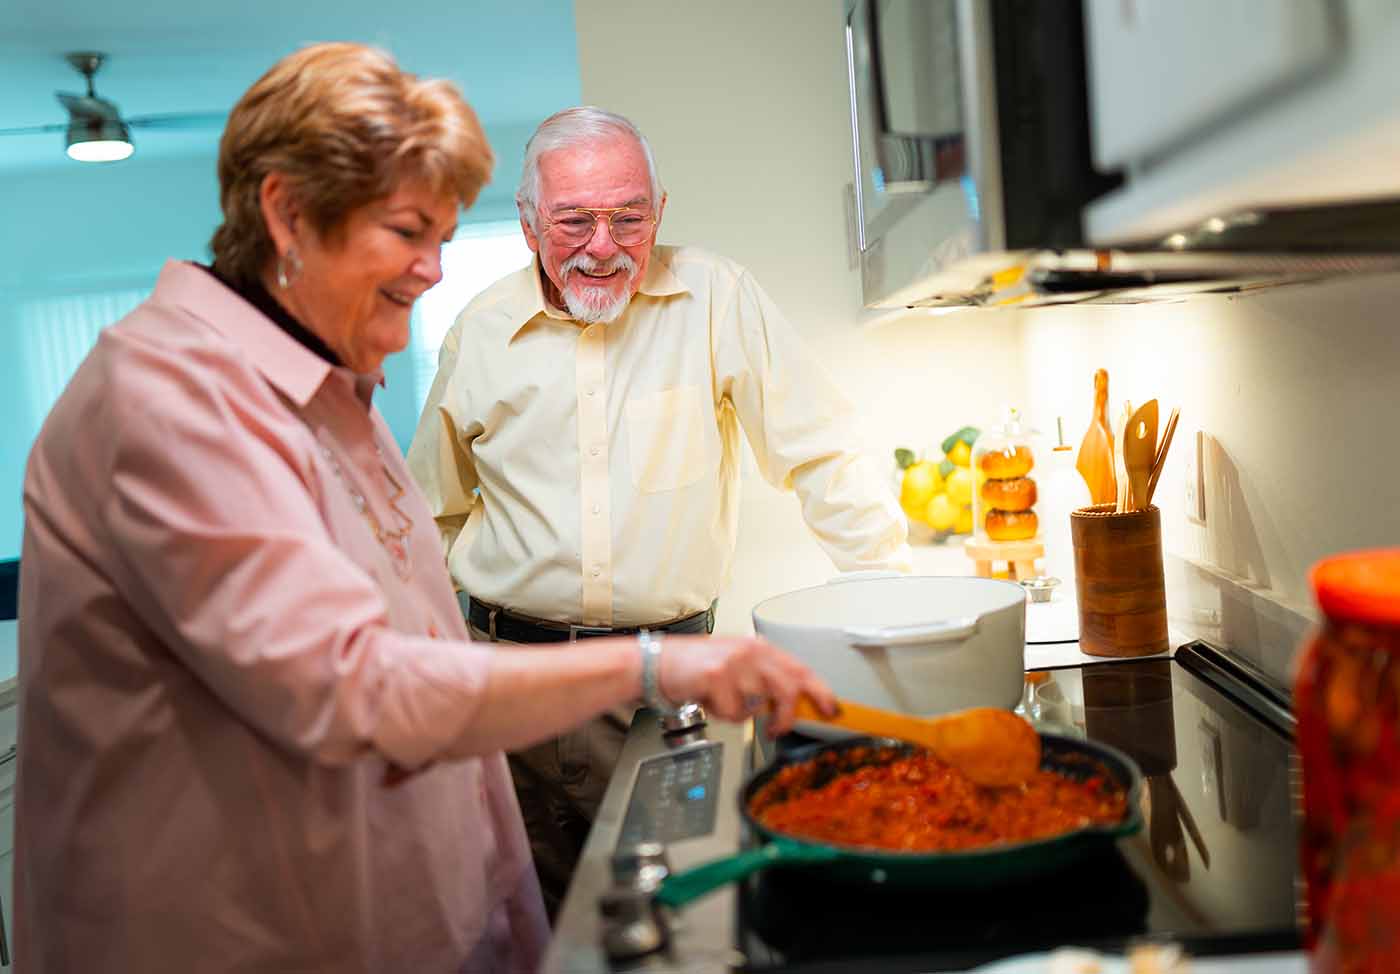 A senior couple stand in the kitchen while one of them stirs a pasta sauce in a pan over the stove-top range